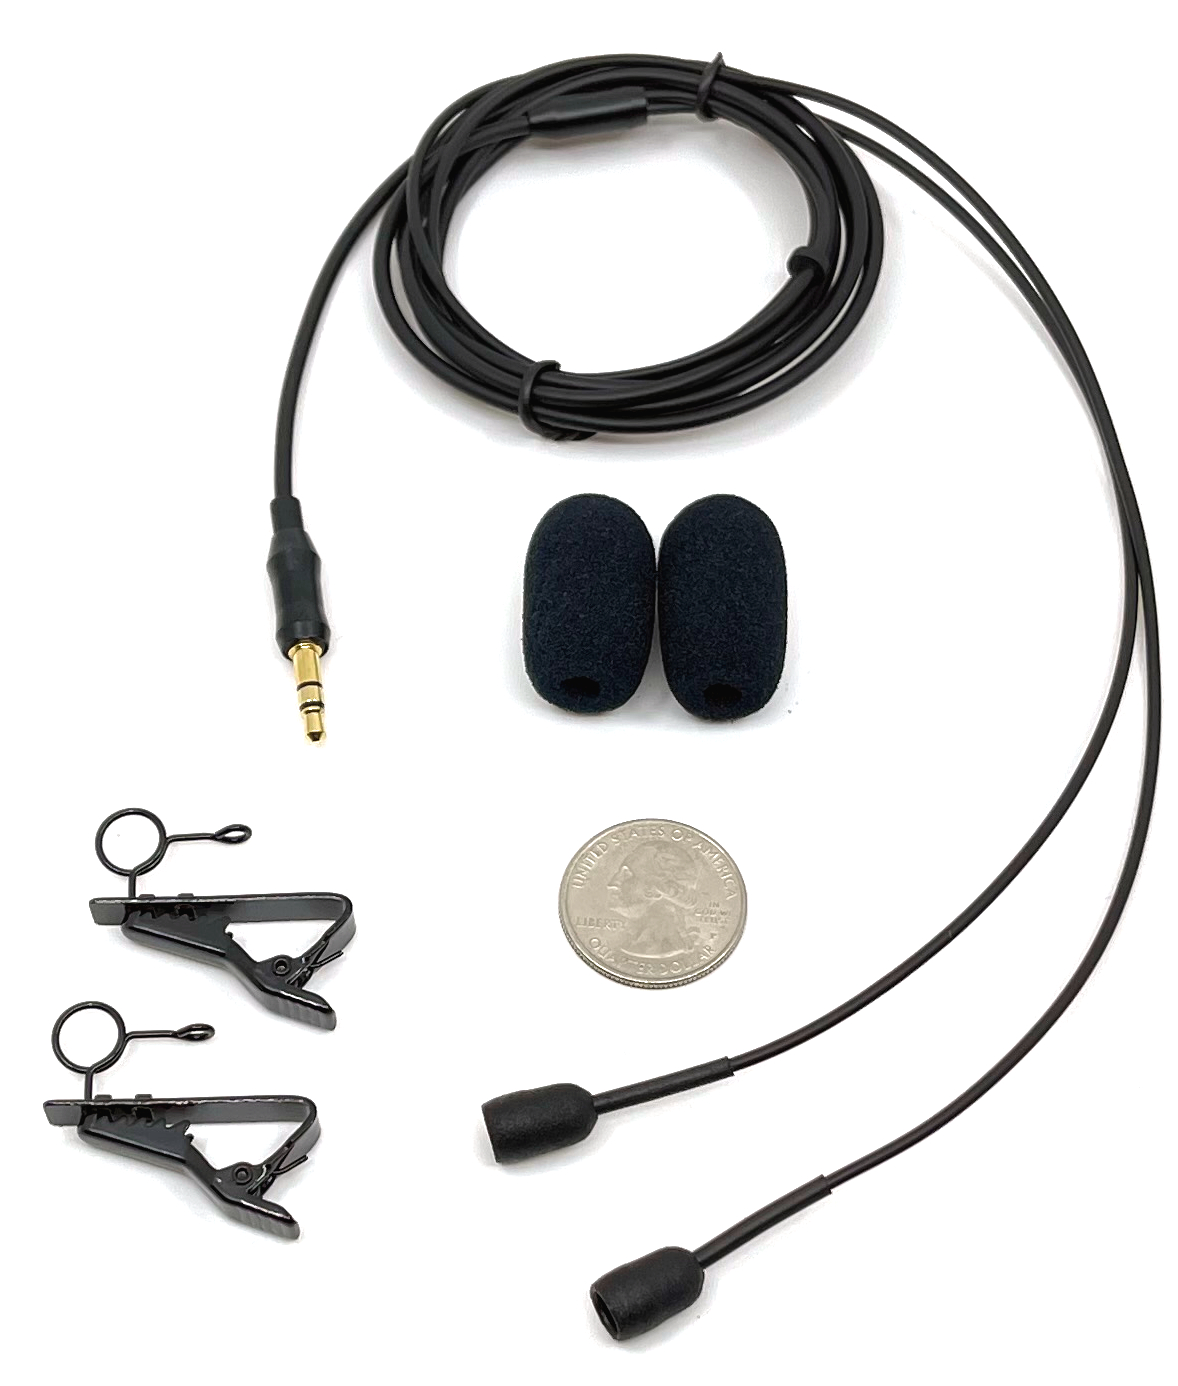 Miniature Binaural Microphones with 3.5mm (1/8") straight gold plated connector - High Sensitivity Questions & Answers